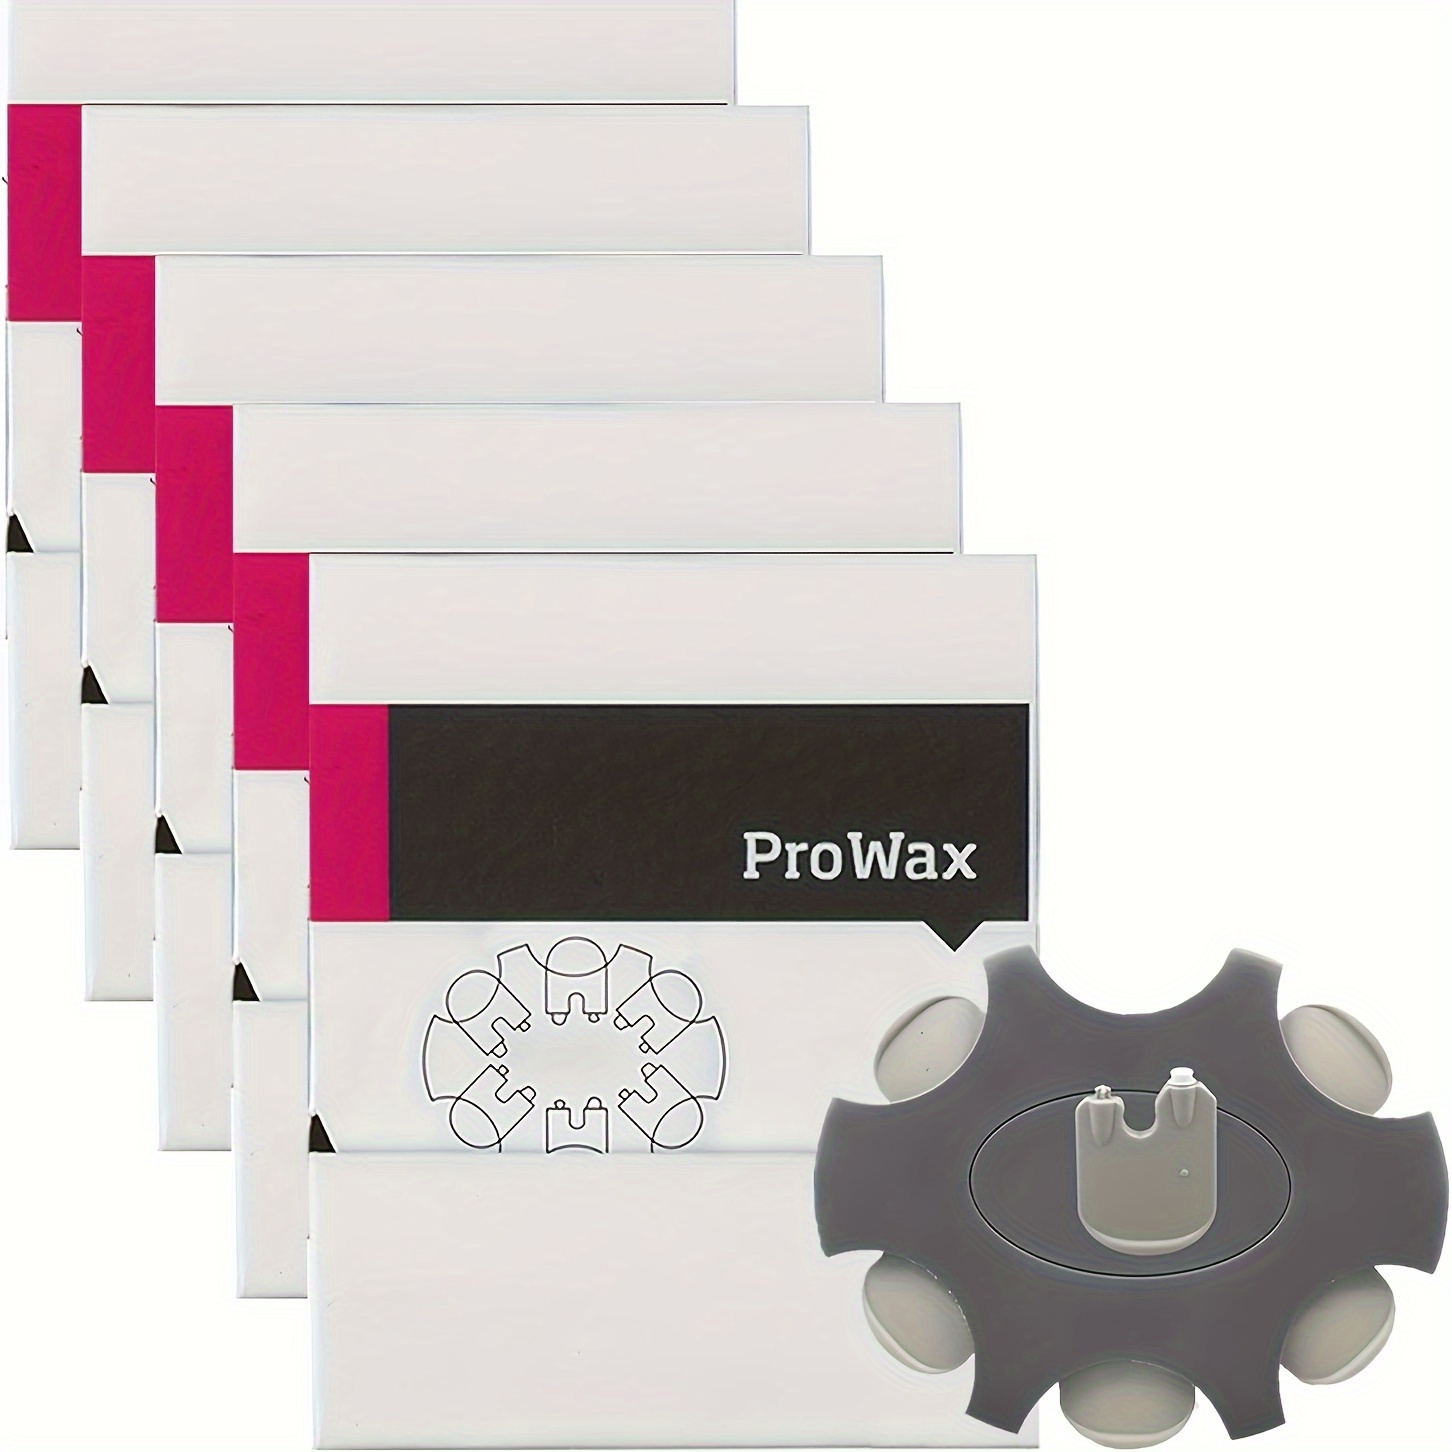 

5 Packs Prowax Filters Hearing Aid Supplies For Prowax Oticon, Prowax Replacement For Oticon Prowax Receives